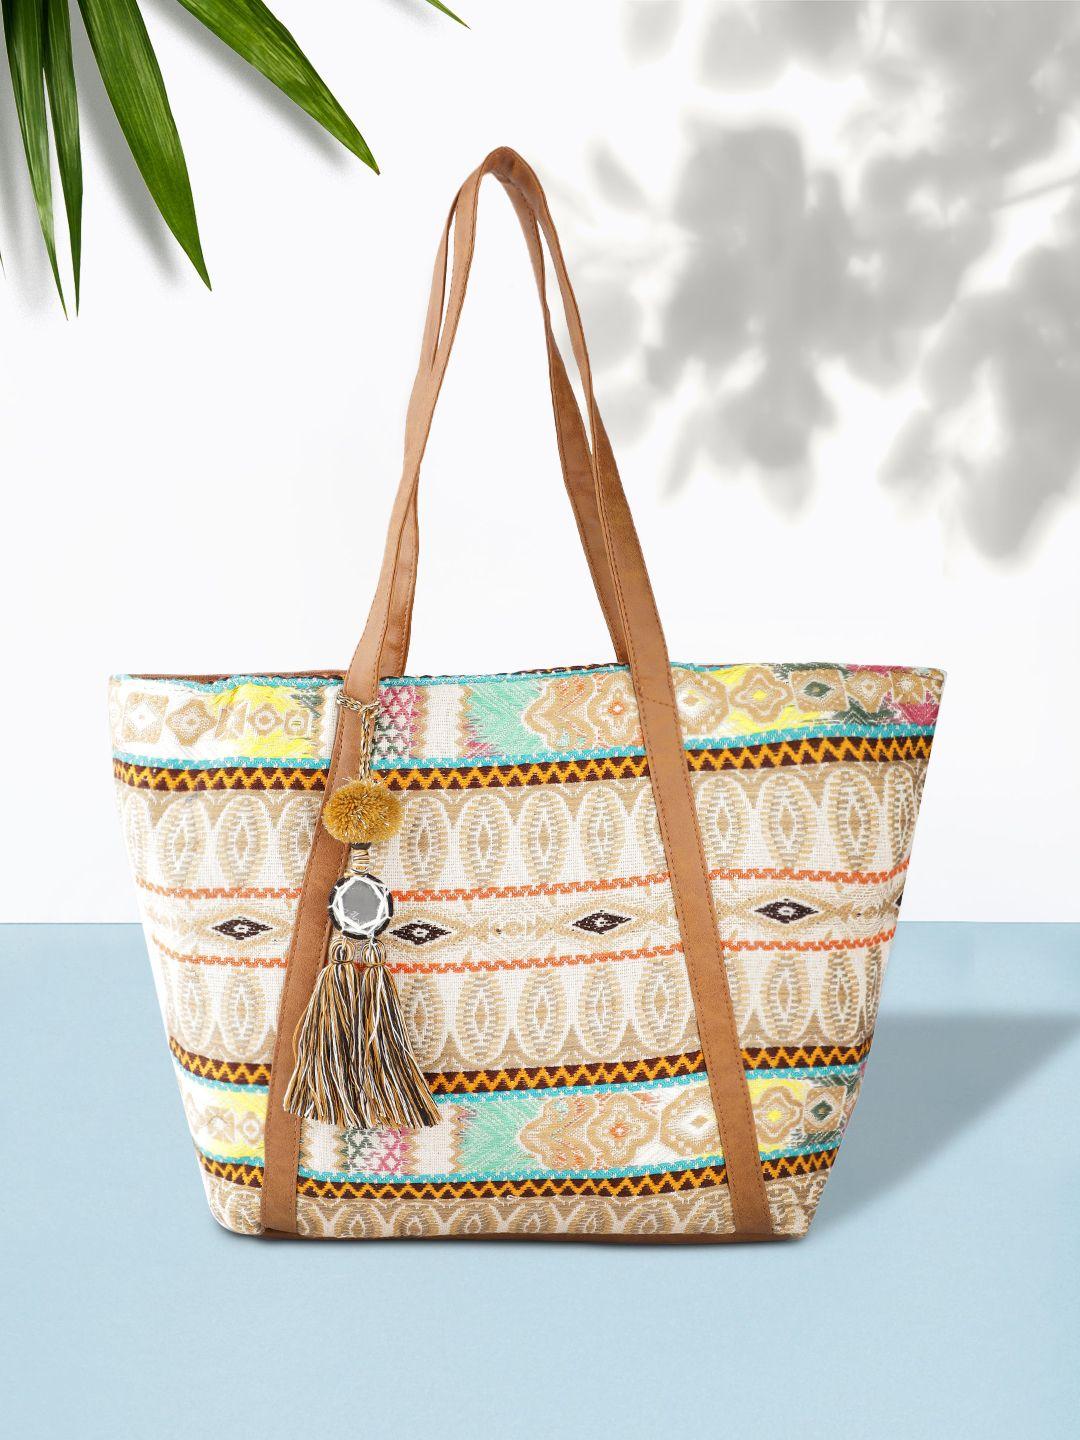 anouk beige & off-white ethnic motif jacquard woven design tote bag with tasselled detail